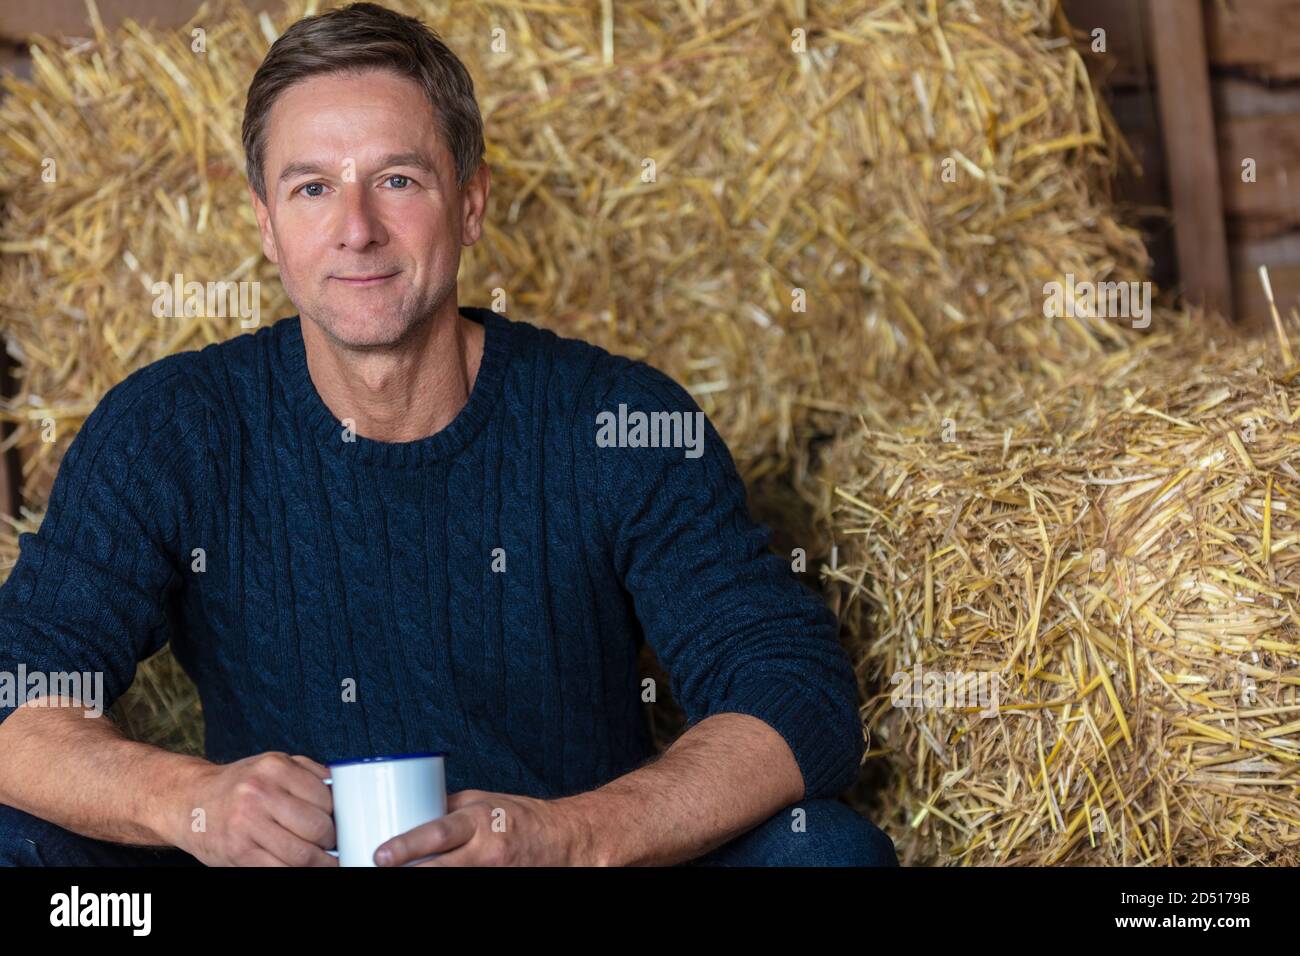 Portrait shot of an attractive, successful and happy middle aged man male wearing a blue sweater sitting on hay bales in a barn or stables drinking cu Stock Photo